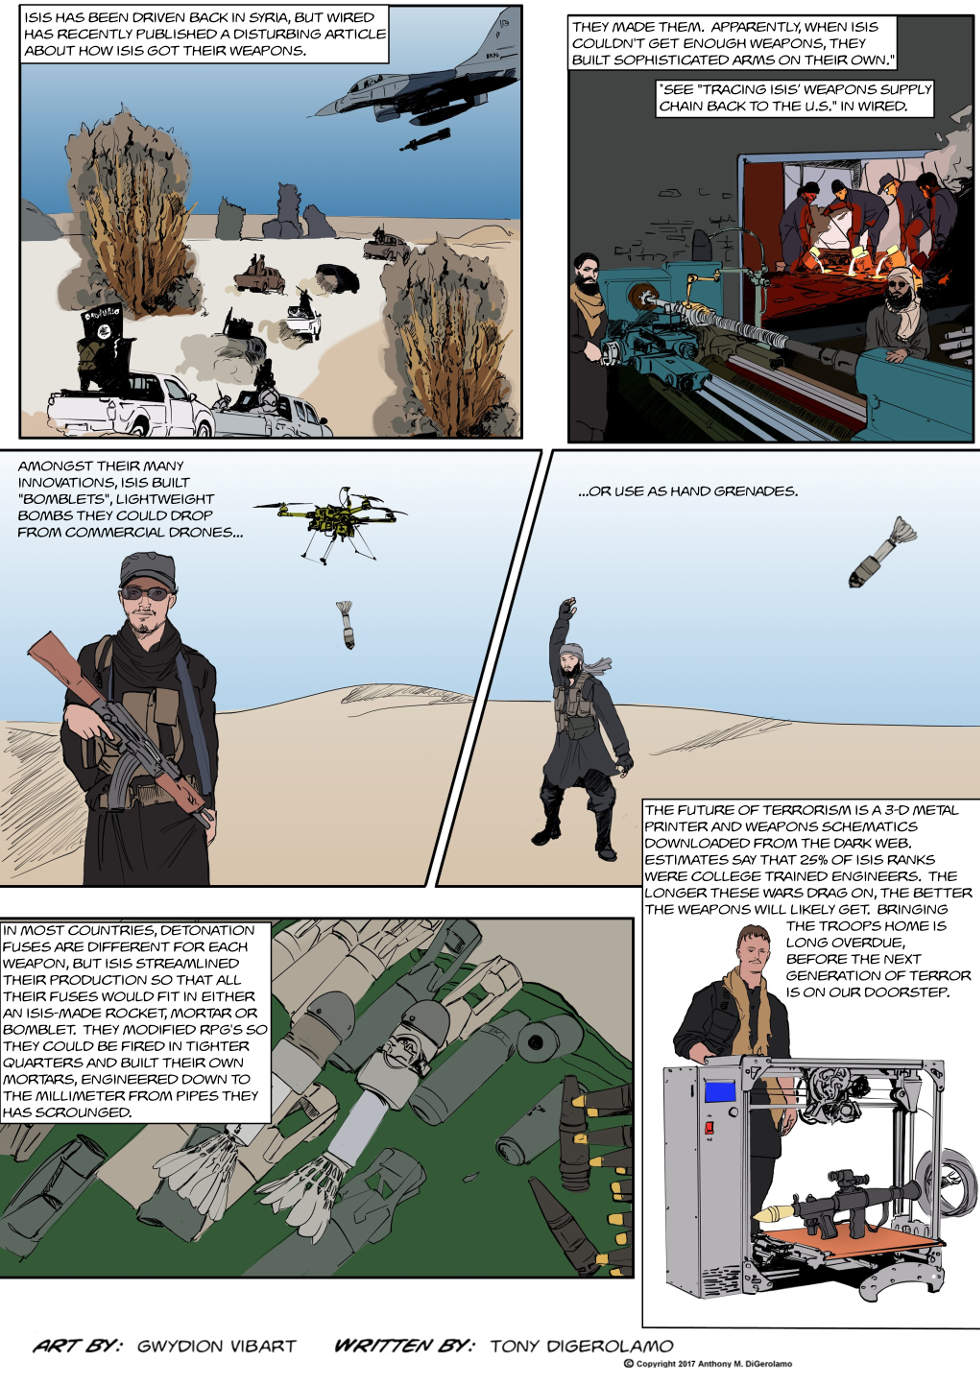 The Antiwar Comic:  ISIS, The Next Generation